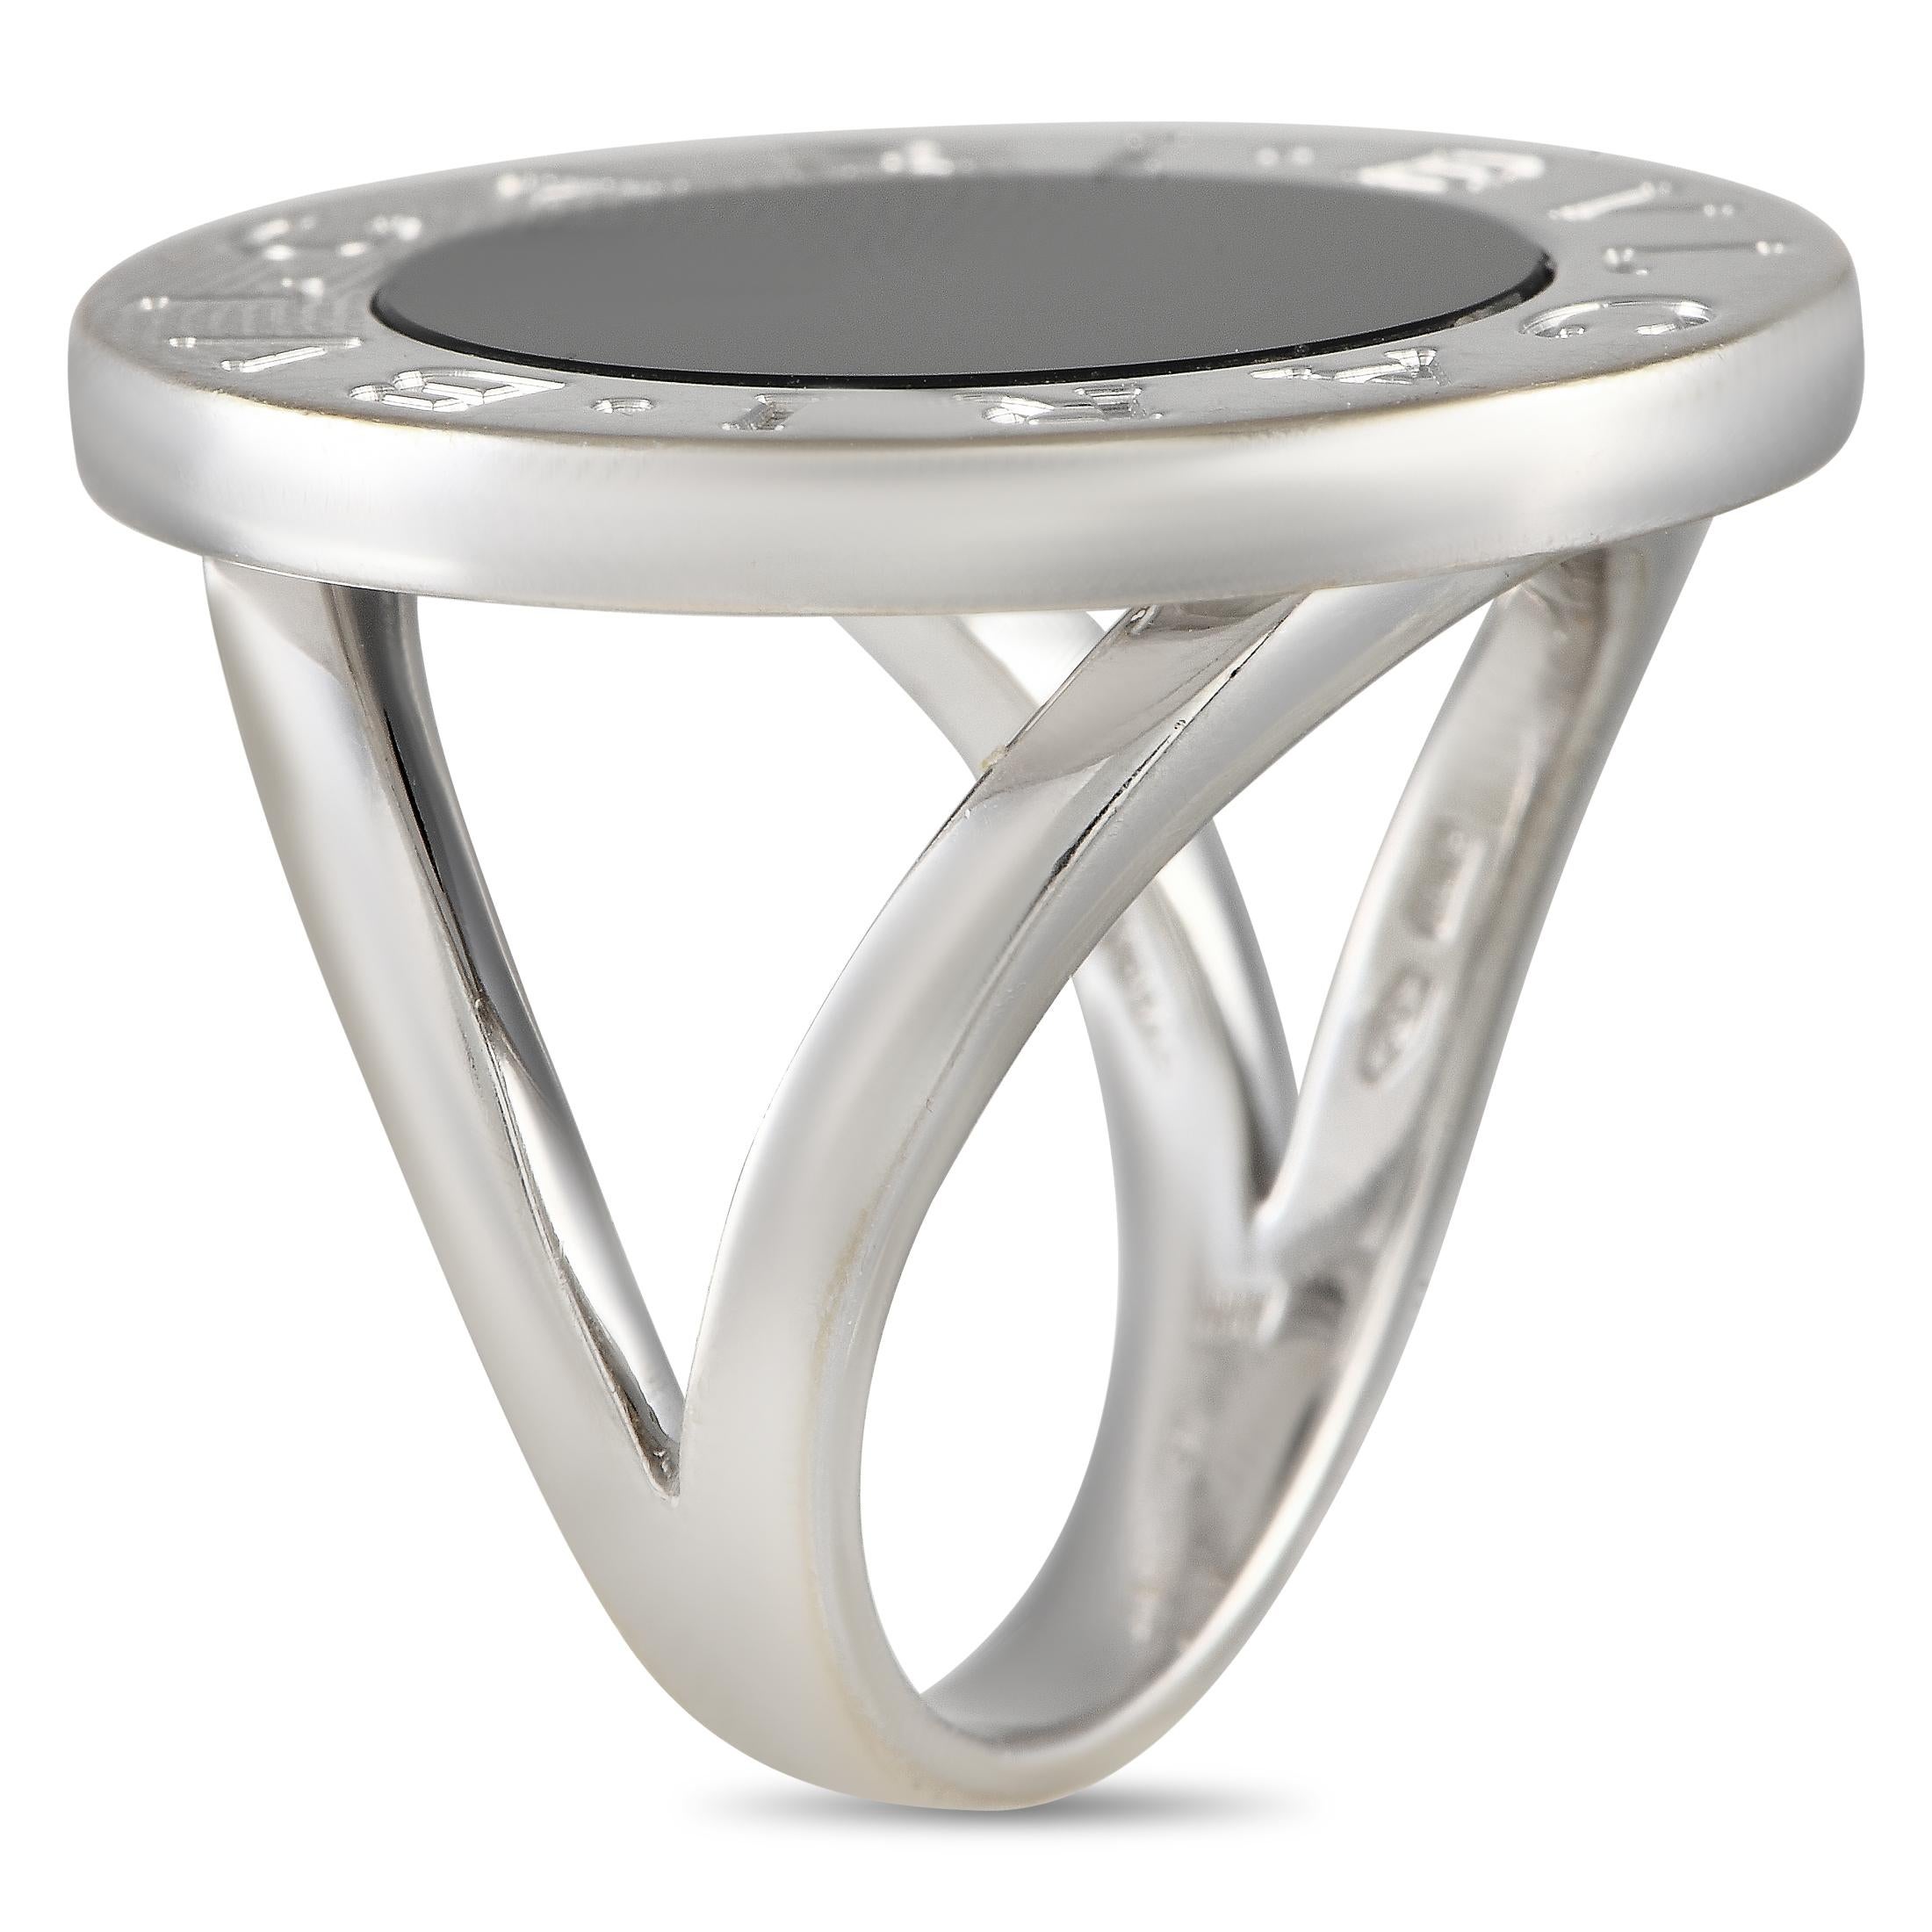 This Bvlgari ring is destined to continually make a statement. The 18K White Gold setting features a delicate 4mm wide band and a top height measuring 3mm. A circular Onyx stone serves as a stunning focal point, while the brand\u2019s name engraved